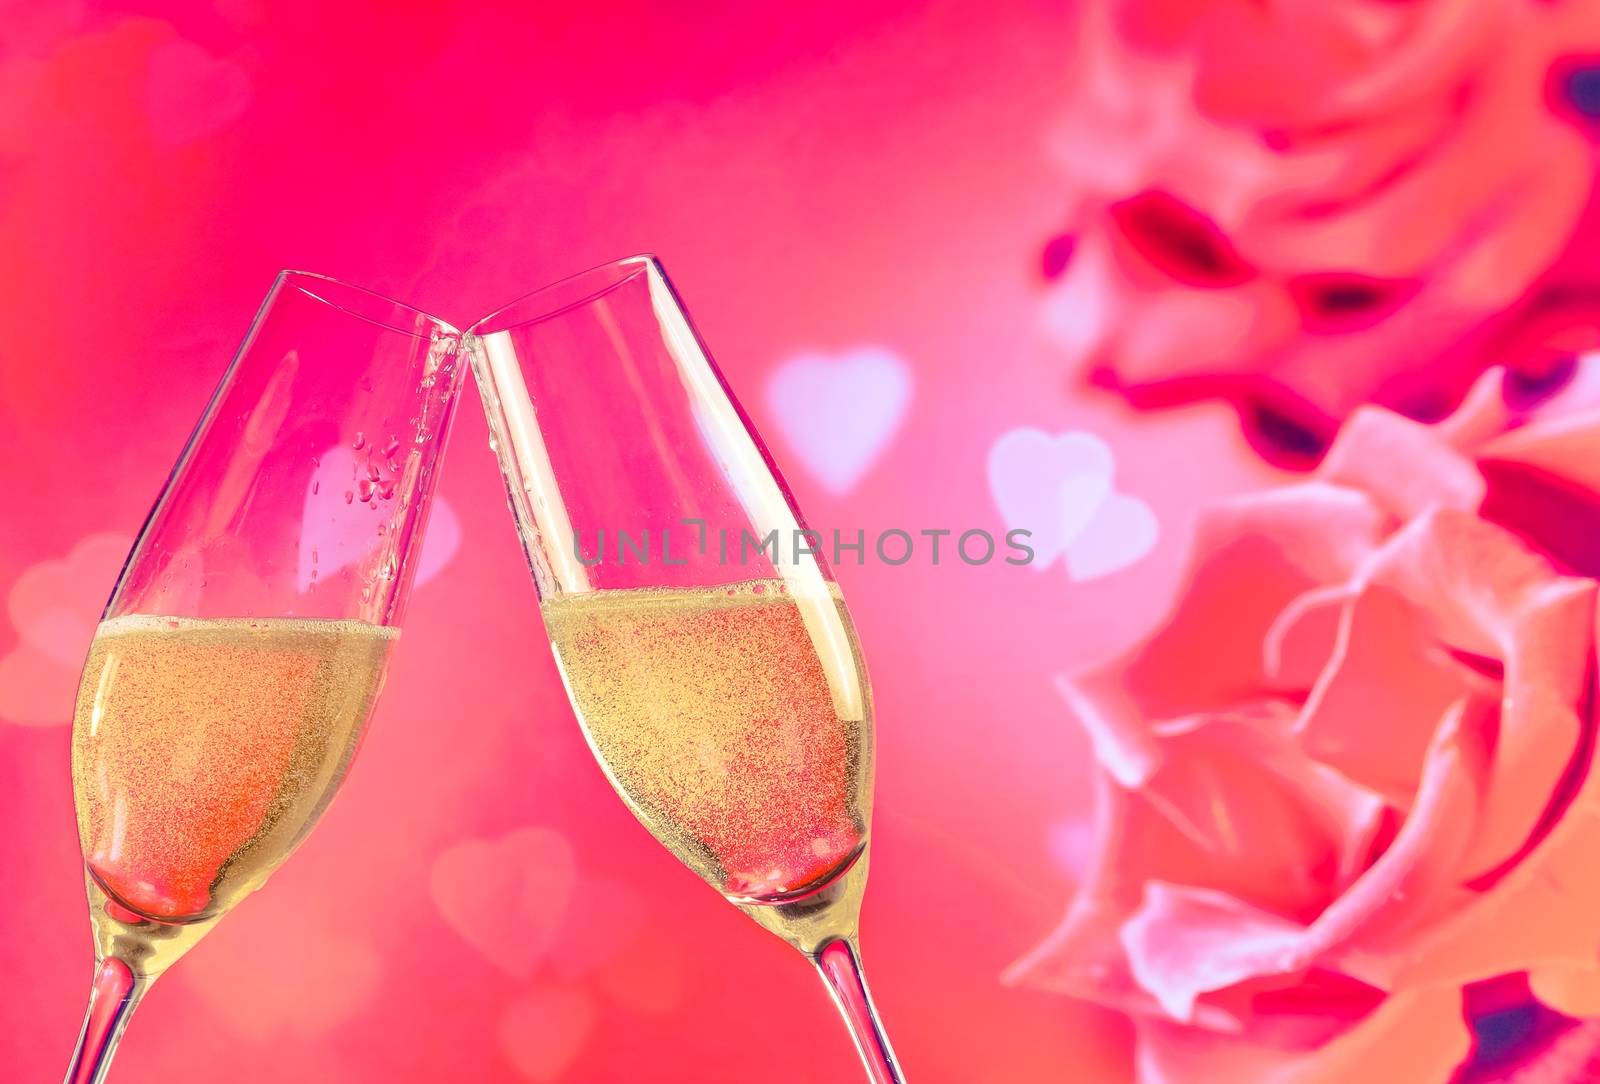 champagne flutes with golden bubbles on roses flowers background by donfiore